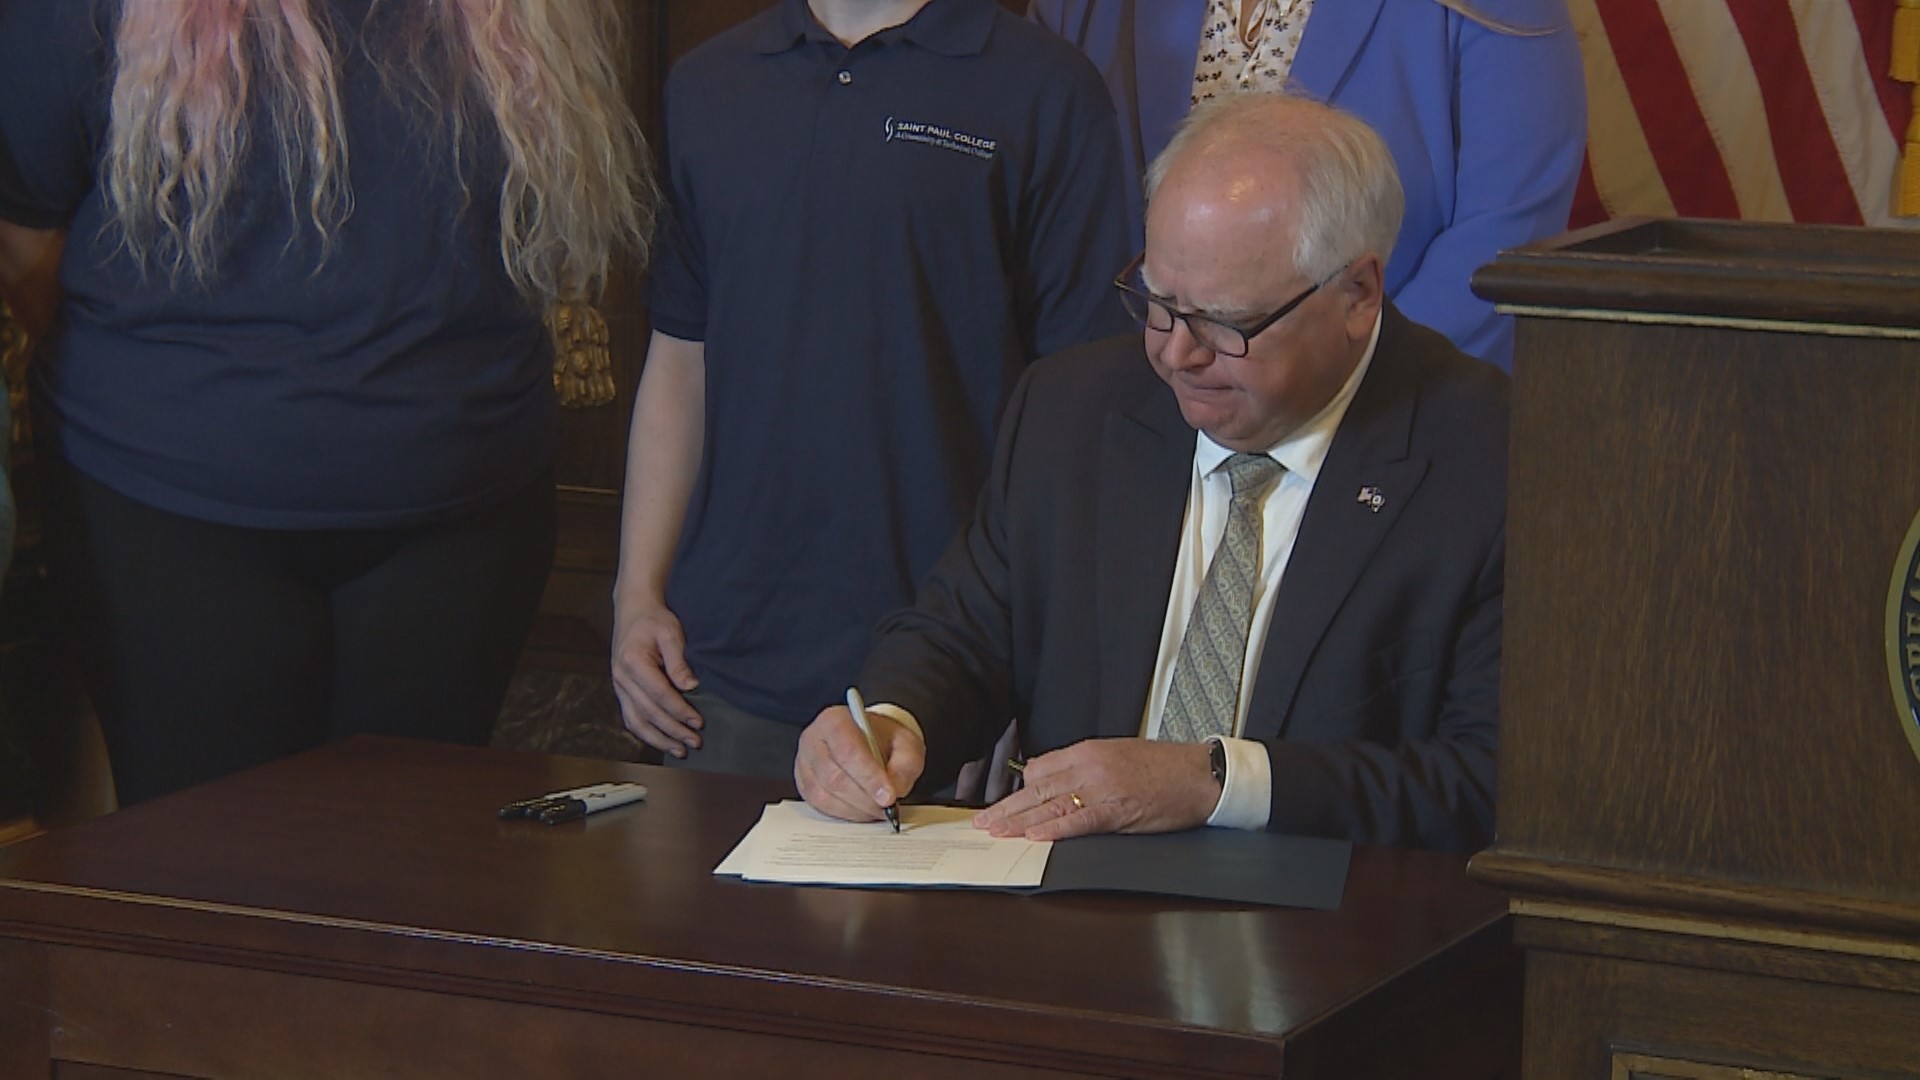 Governor Tim Walz signed an executive order Monday afternoon that removes the college degree requirement for 75% of Minnesota's government jobs.